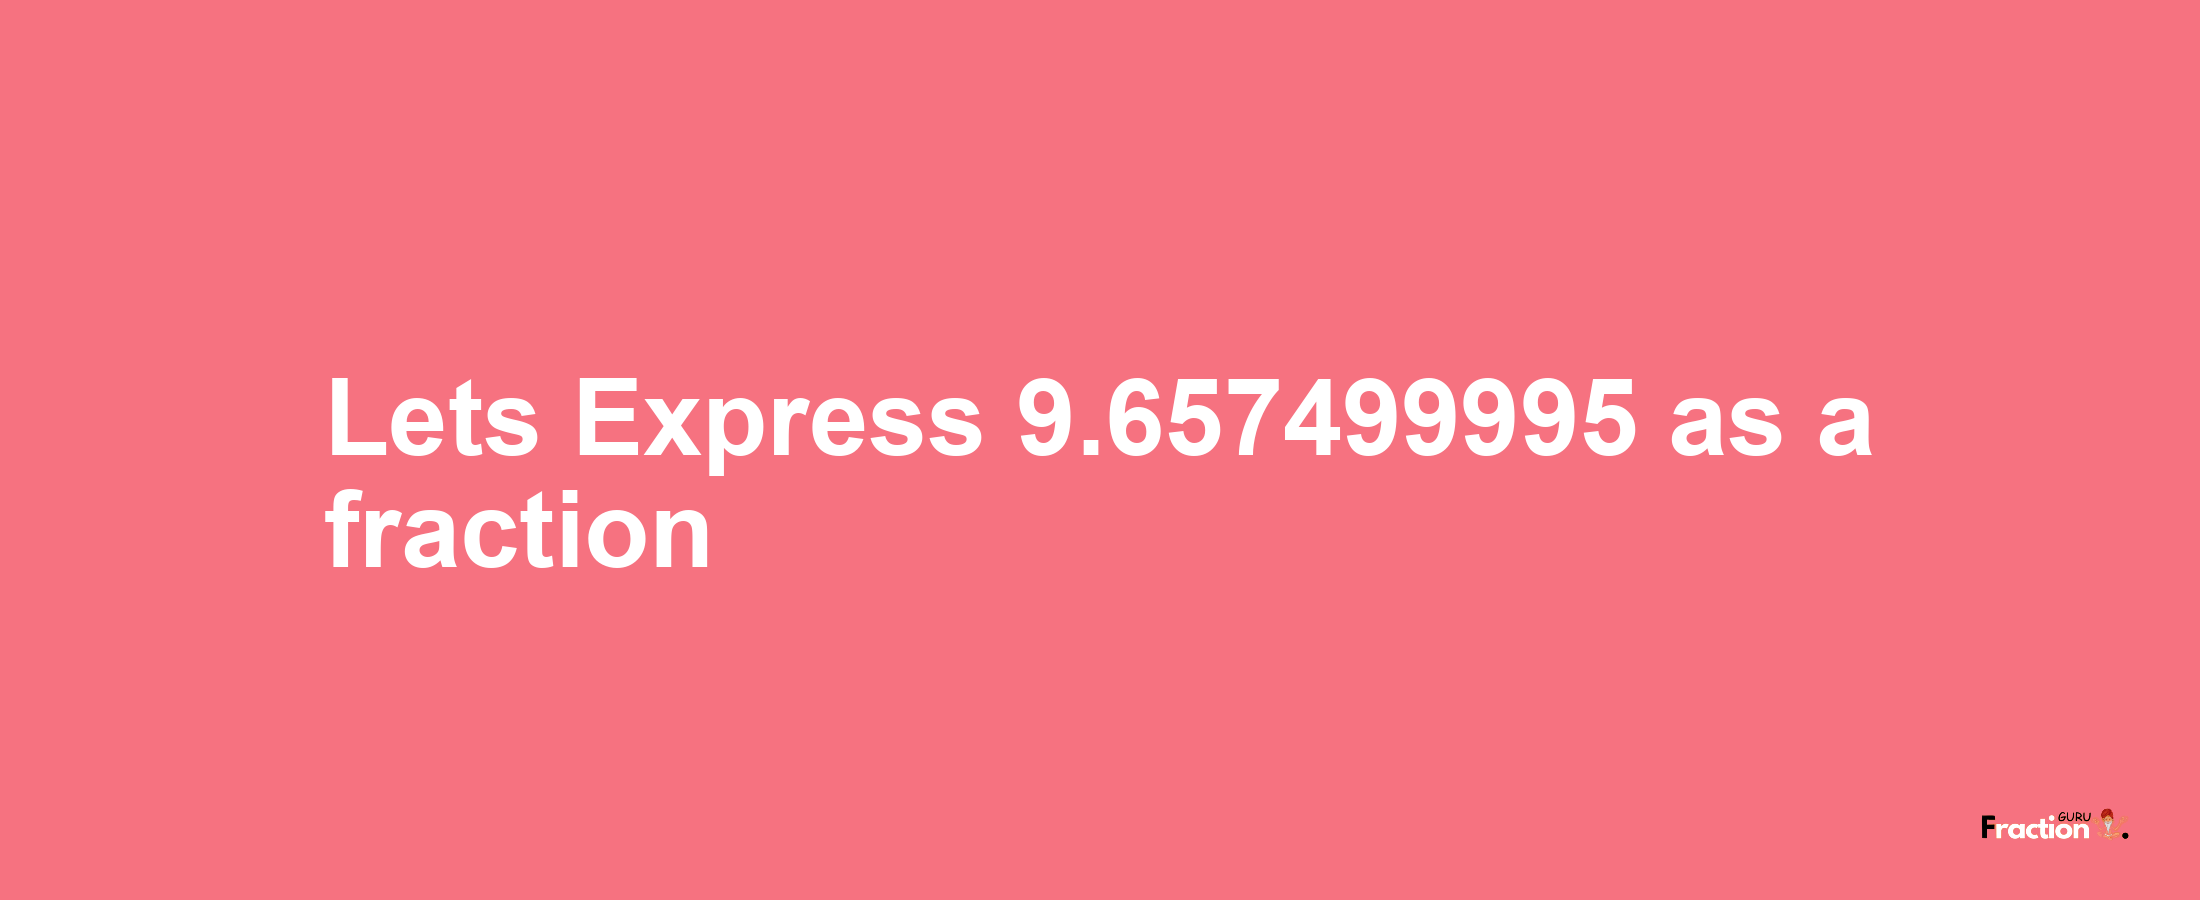 Lets Express 9.657499995 as afraction